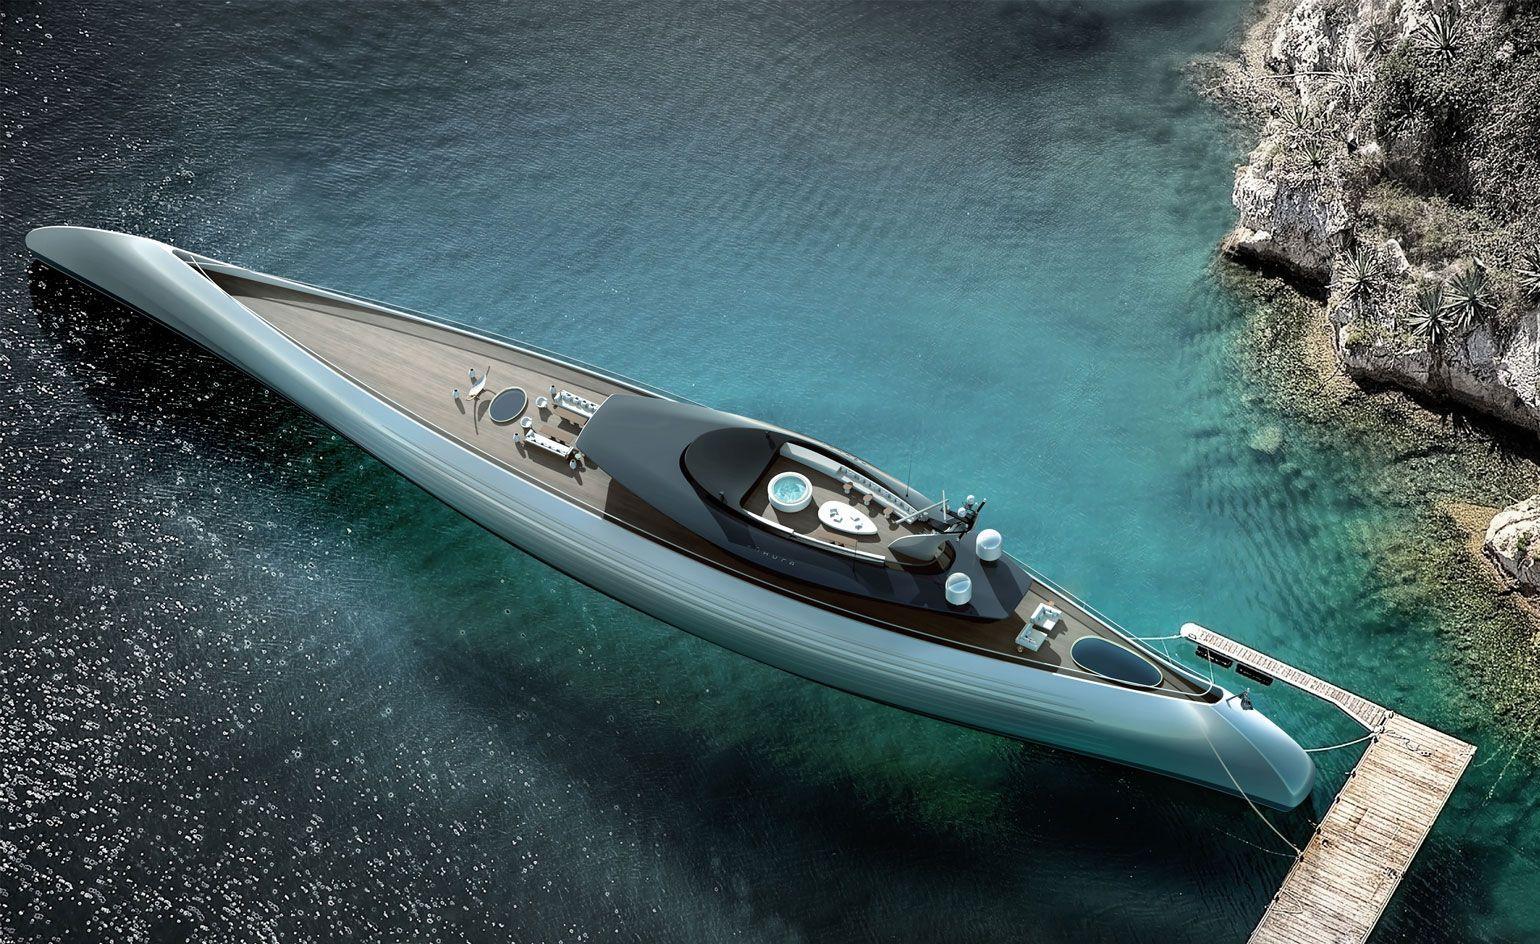 Dream boats: outrageously designed yacht concepts of 2018. Boats